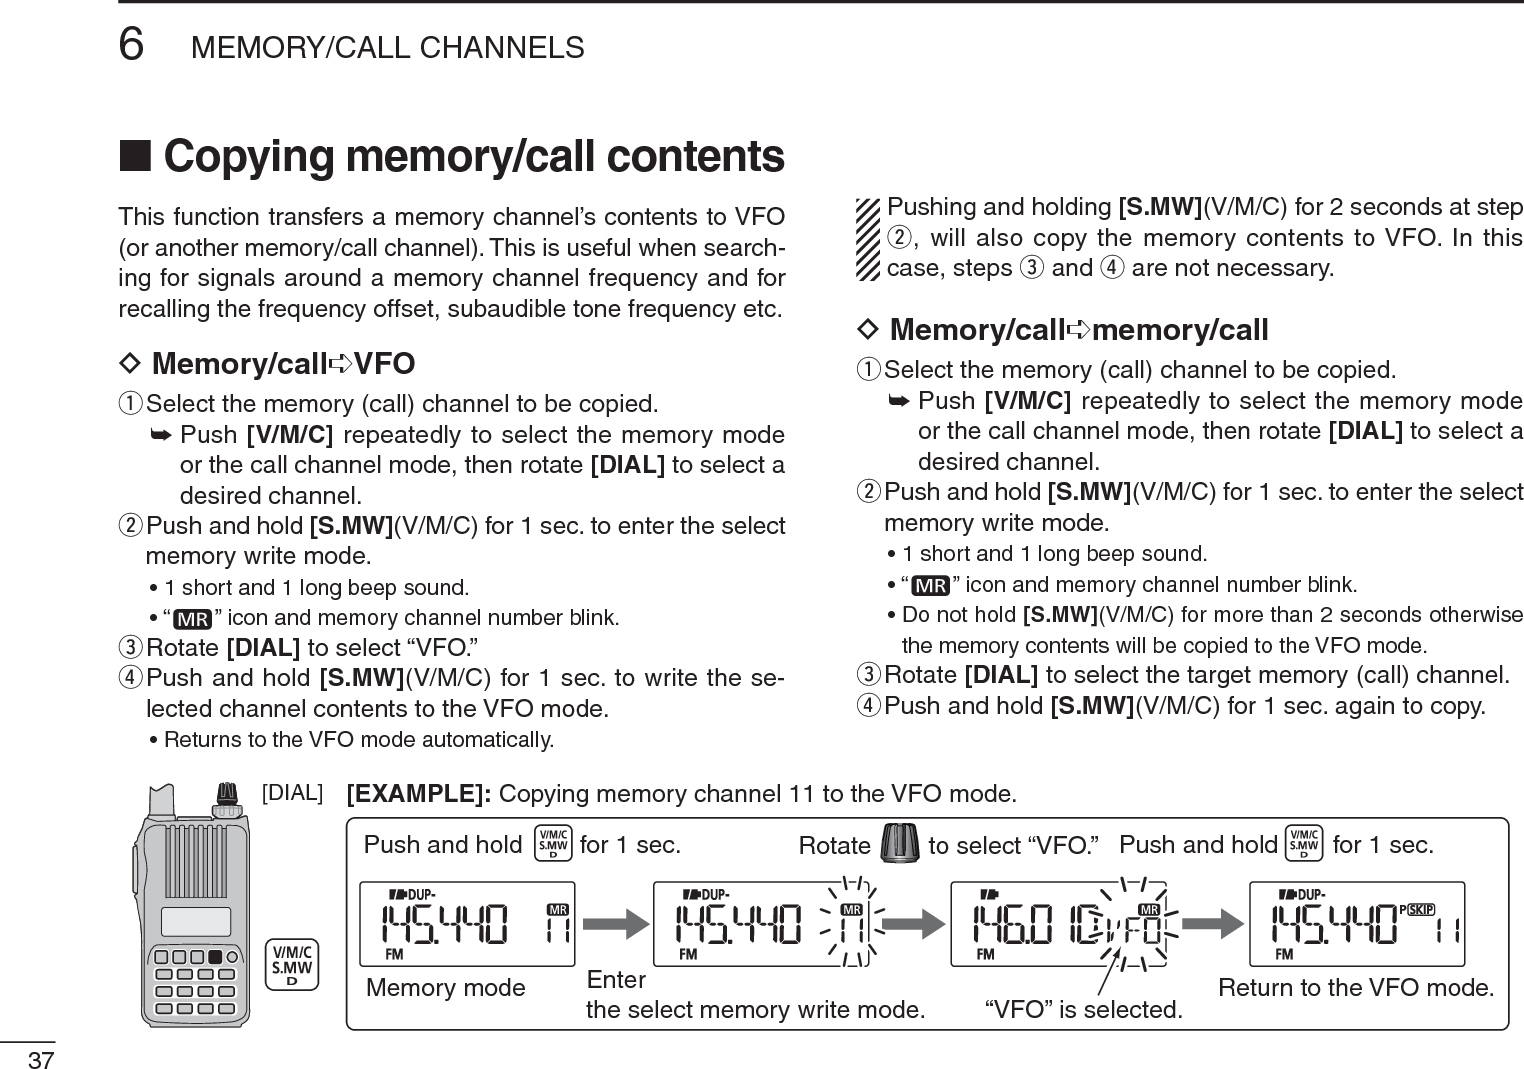 376MEMORY/CALL CHANNELSN Copying memory/call contentsThis function transfers a memory channel’s contents to VFO (or another memory/call channel). This is useful when search-ing for signals around a memory channel frequency and for recalling the frequency offset, subaudible tone frequency etc.D Memory/call¶VFOqSelect the memory (call) channel to be copied.±Push [V/M/C] repeatedly to select the memory mode or the call channel mode, then rotate [DIAL] to select a desired channel.w  Push and hold [S.MW](V/M/C) for 1 sec. to enter the select memory write mode.• 1 short and 1 long beep sound.•“ ” icon and memory channel number blink.eRotate [DIAL] to select “VFO.”r  Push and hold [S.MW](V/M/C) for 1 sec. to write the se-lected channel contents to the VFO mode.• Returns to the VFO mode automatically.Pushing and holding [S.MW](V/M/C) for 2 seconds at step w, will also copy the memory contents to VFO. In this case, steps e and r are not necessary.DMemory/call¶memory/callqSelect the memory (call) channel to be copied.±Push [V/M/C] repeatedly to select the memory mode or the call channel mode, then rotate [DIAL] to select a desired channel.w  Push and hold [S.MW](V/M/C) for 1 sec. to enter the select memory write mode.• 1 short and 1 long beep sound.•“ ” icon and memory channel number blink.• Do not hold [S.MW](V/M/C) for more than 2 seconds otherwise the memory contents will be copied to the VFO mode.eRotate [DIAL] to select the target memory (call) channel.rPush and hold [S.MW](V/M/C) for 1 sec. again to copy.[DIAL]Memory mode Enterthe select memory write mode.to select “VFO.”RotatePush and hold for 1 sec.“VFO” is selected. Return to the VFO mode.Push and hold for 1 sec.[EXAMPLE]: Copying memory channel 11 to the VFO mode.